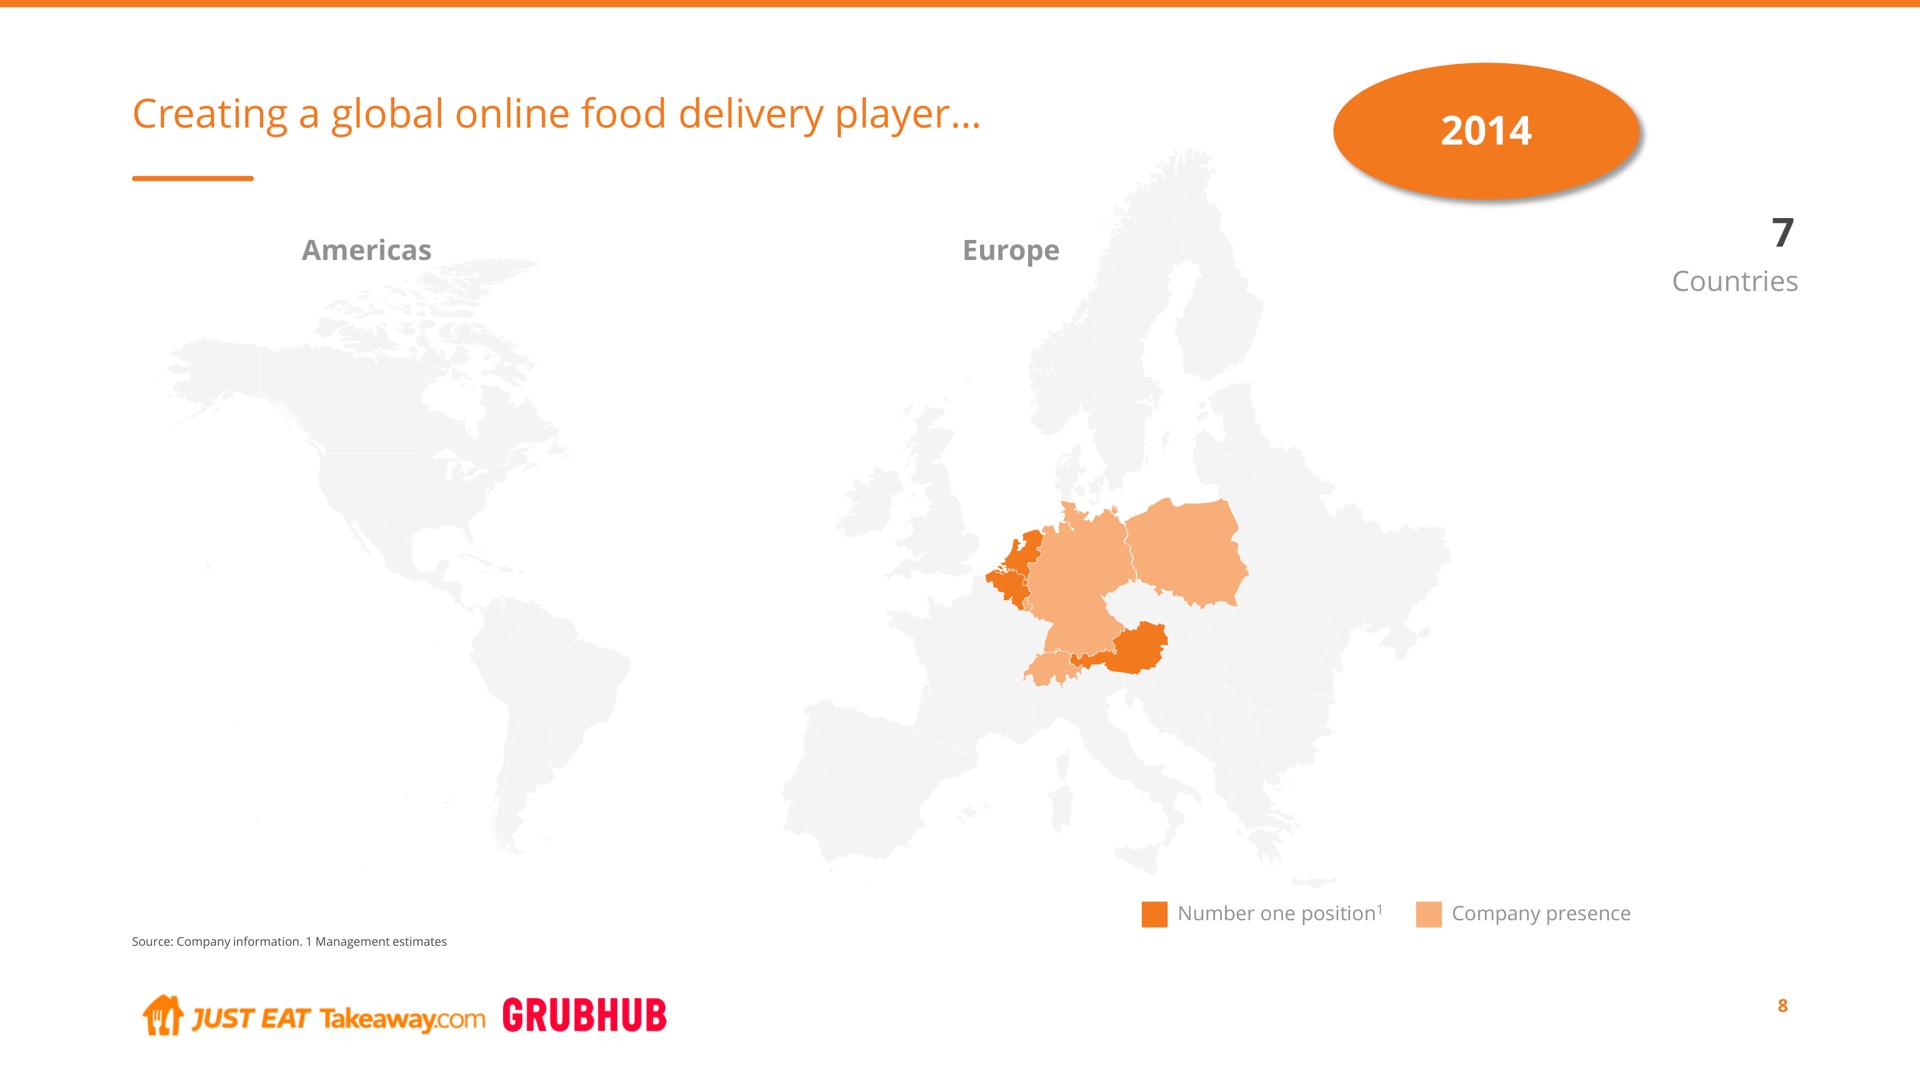 creating a global food delivery player | Just Eat Takeaway.com